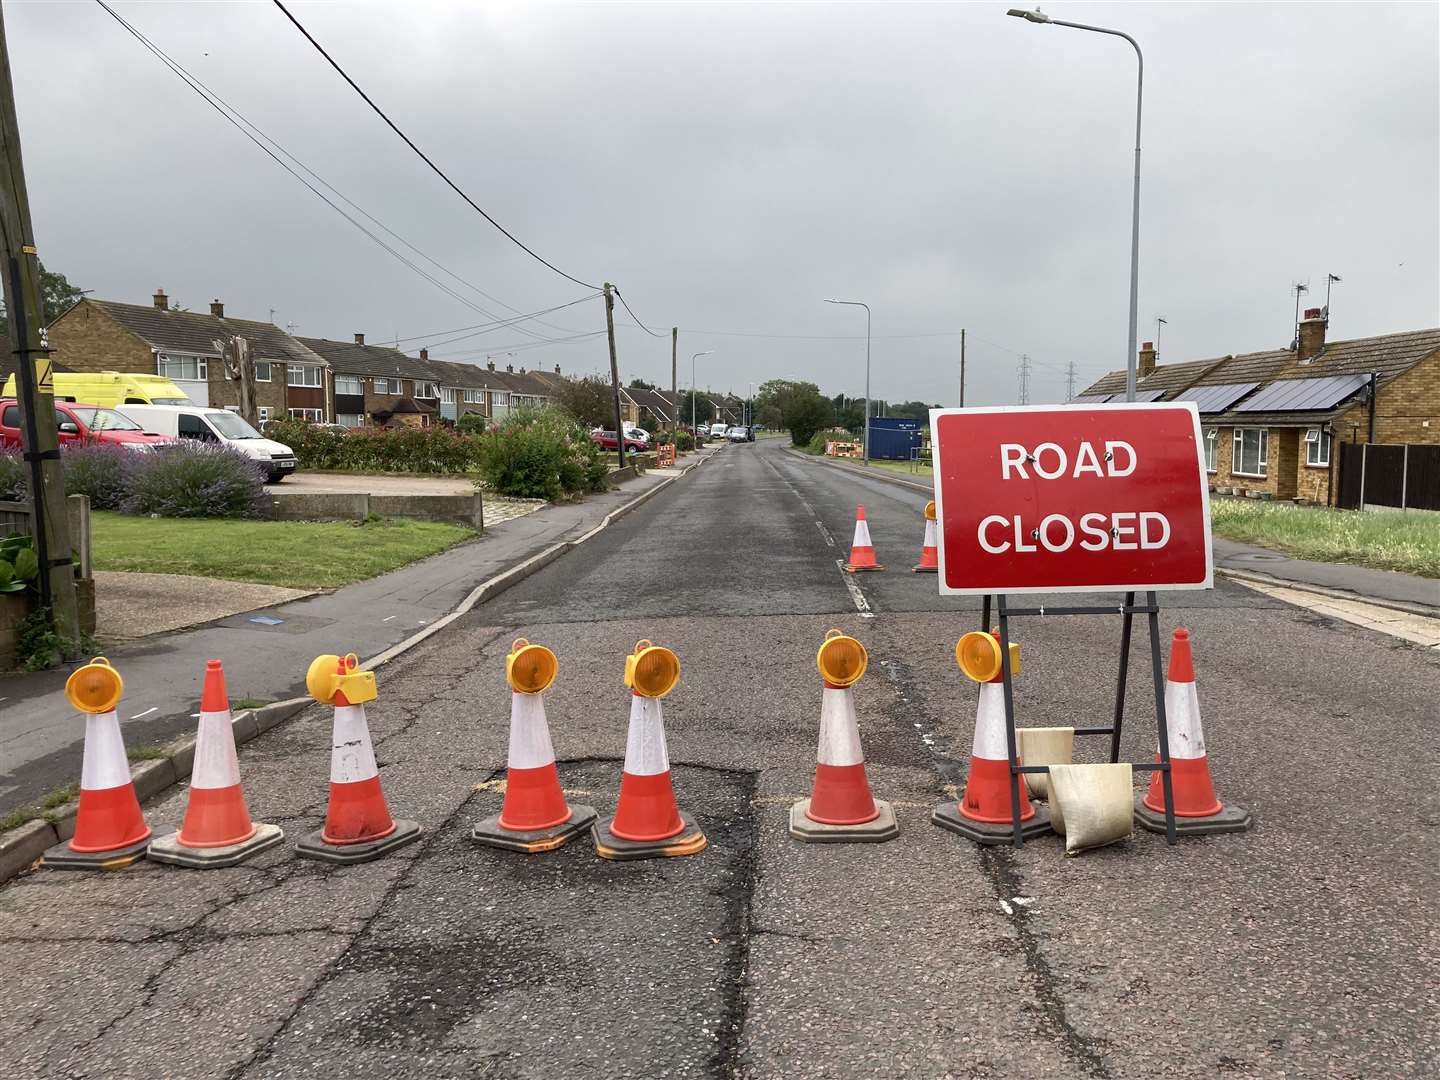 Queenborough Road, Sheppey, closed because of gas main repairs